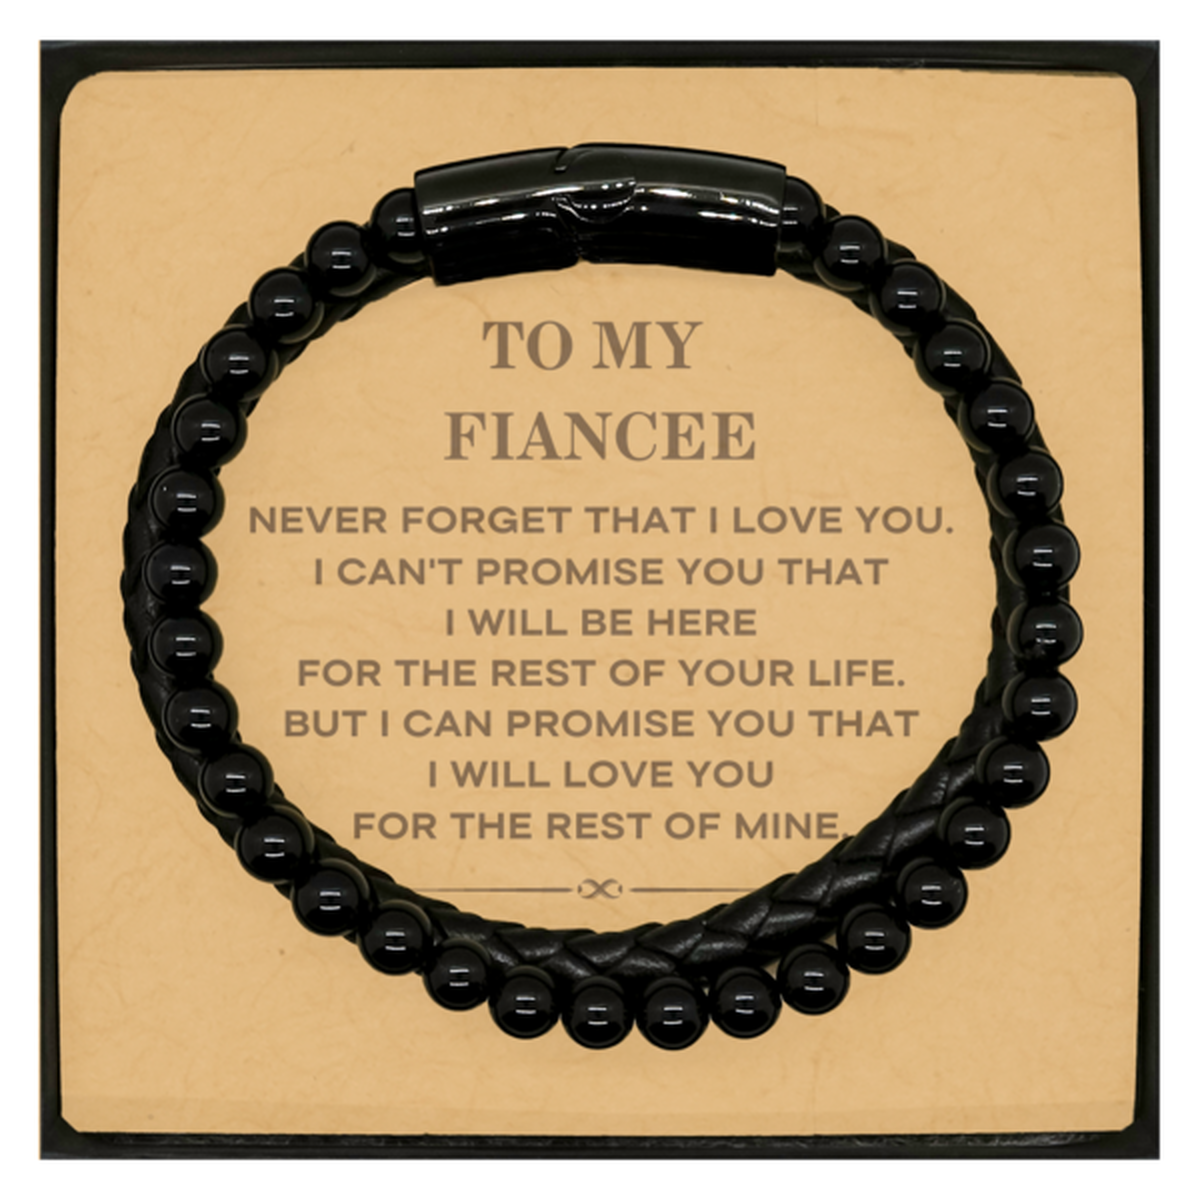 To My Fiancee Gifts, I will love you for the rest of mine, Love Fiancee Bracelet, Birthday Christmas Unique Stone Leather Bracelets For Fiancee